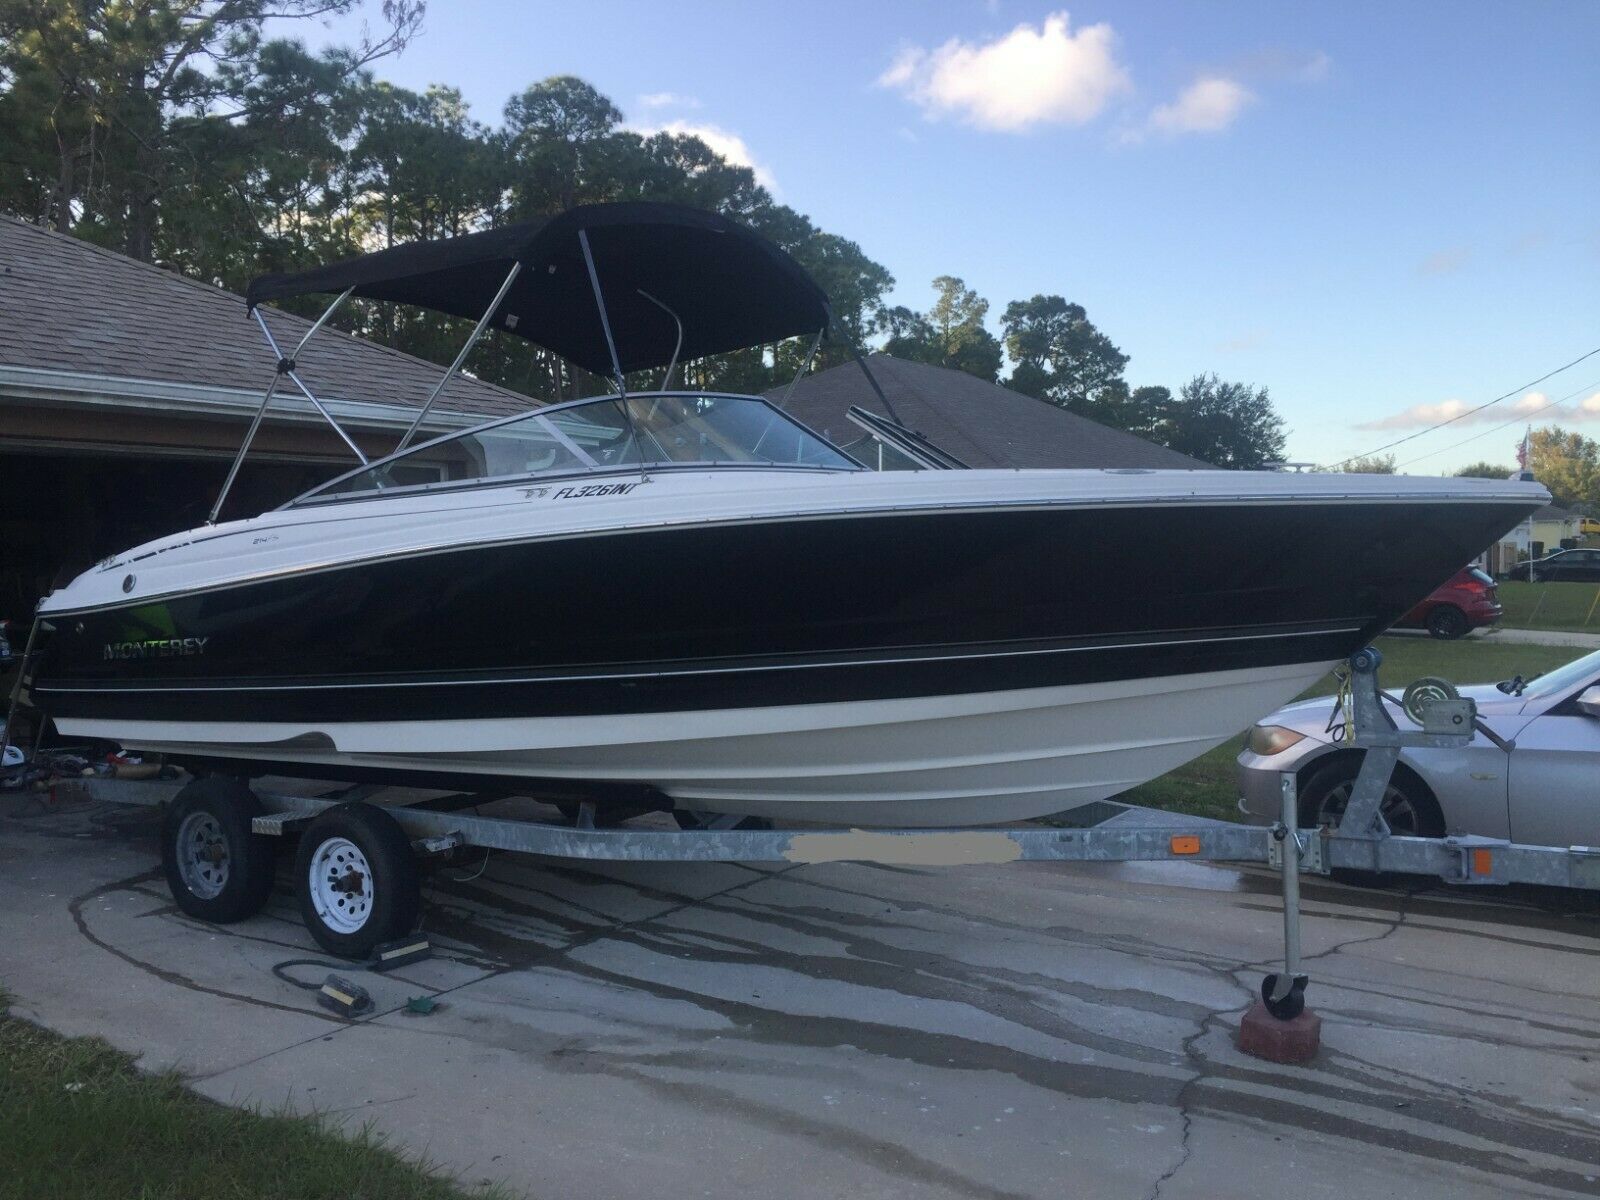 Monterey 214 FS 2006 for sale for $12,800 - Boats-from-USA.com.